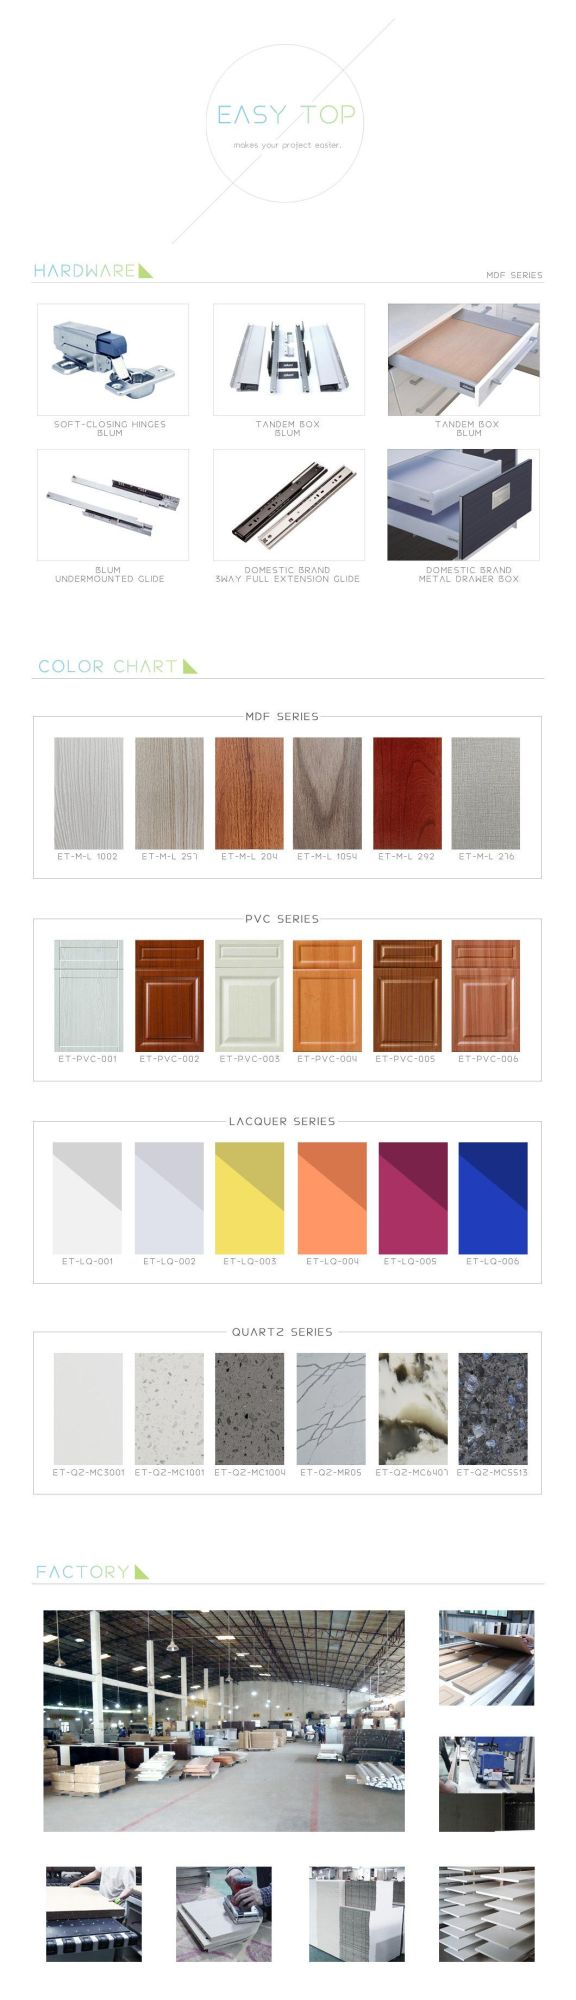 Dirty Proof New Design Paint White Lacquer Finish Modern Kitchen Furniture Cabinets Foshan